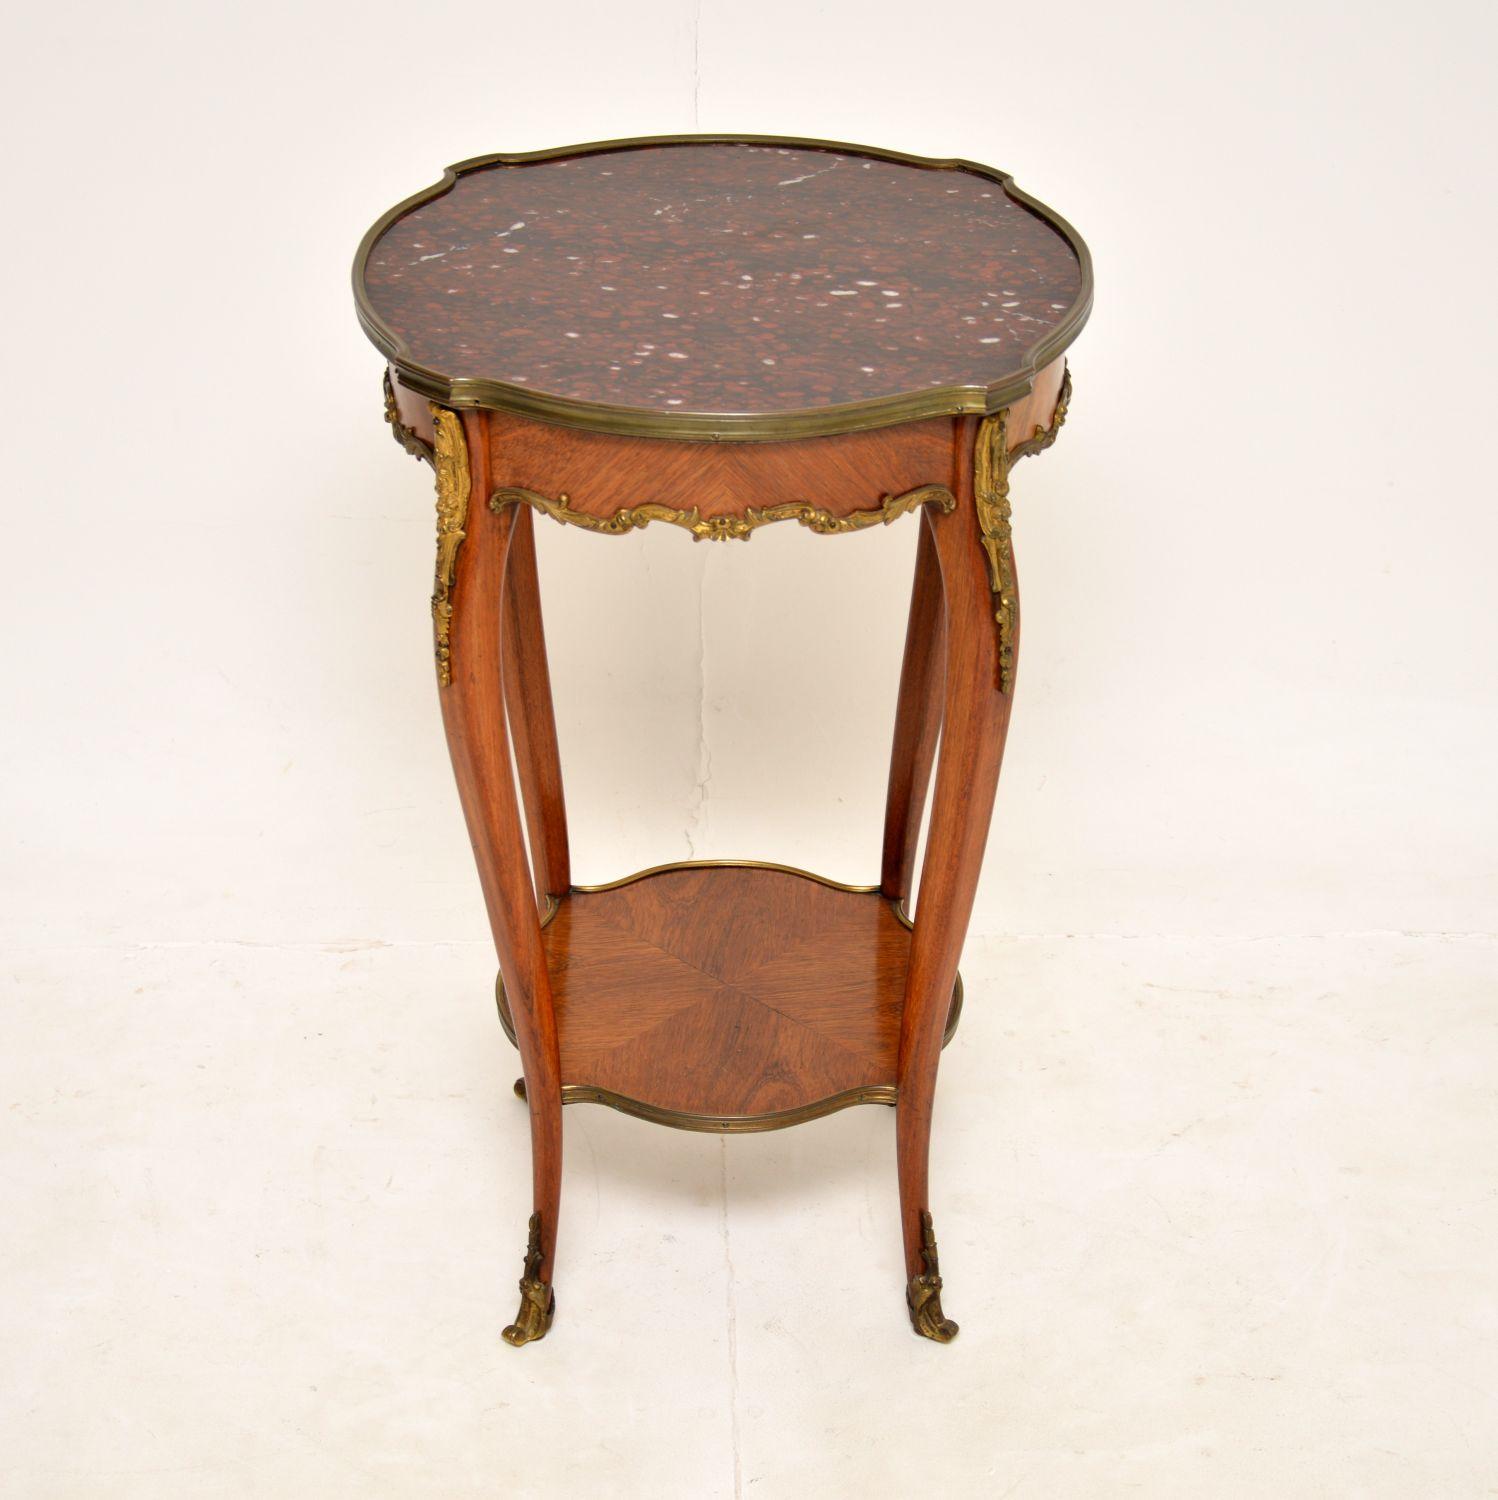 A stunning original antique French marble top side table, dating from around the 1880-1890 period.

It is of superb quality, beautifully constructed from walnut with extremely fine gilt bronze mounts & feet. The original marble top is absolutely